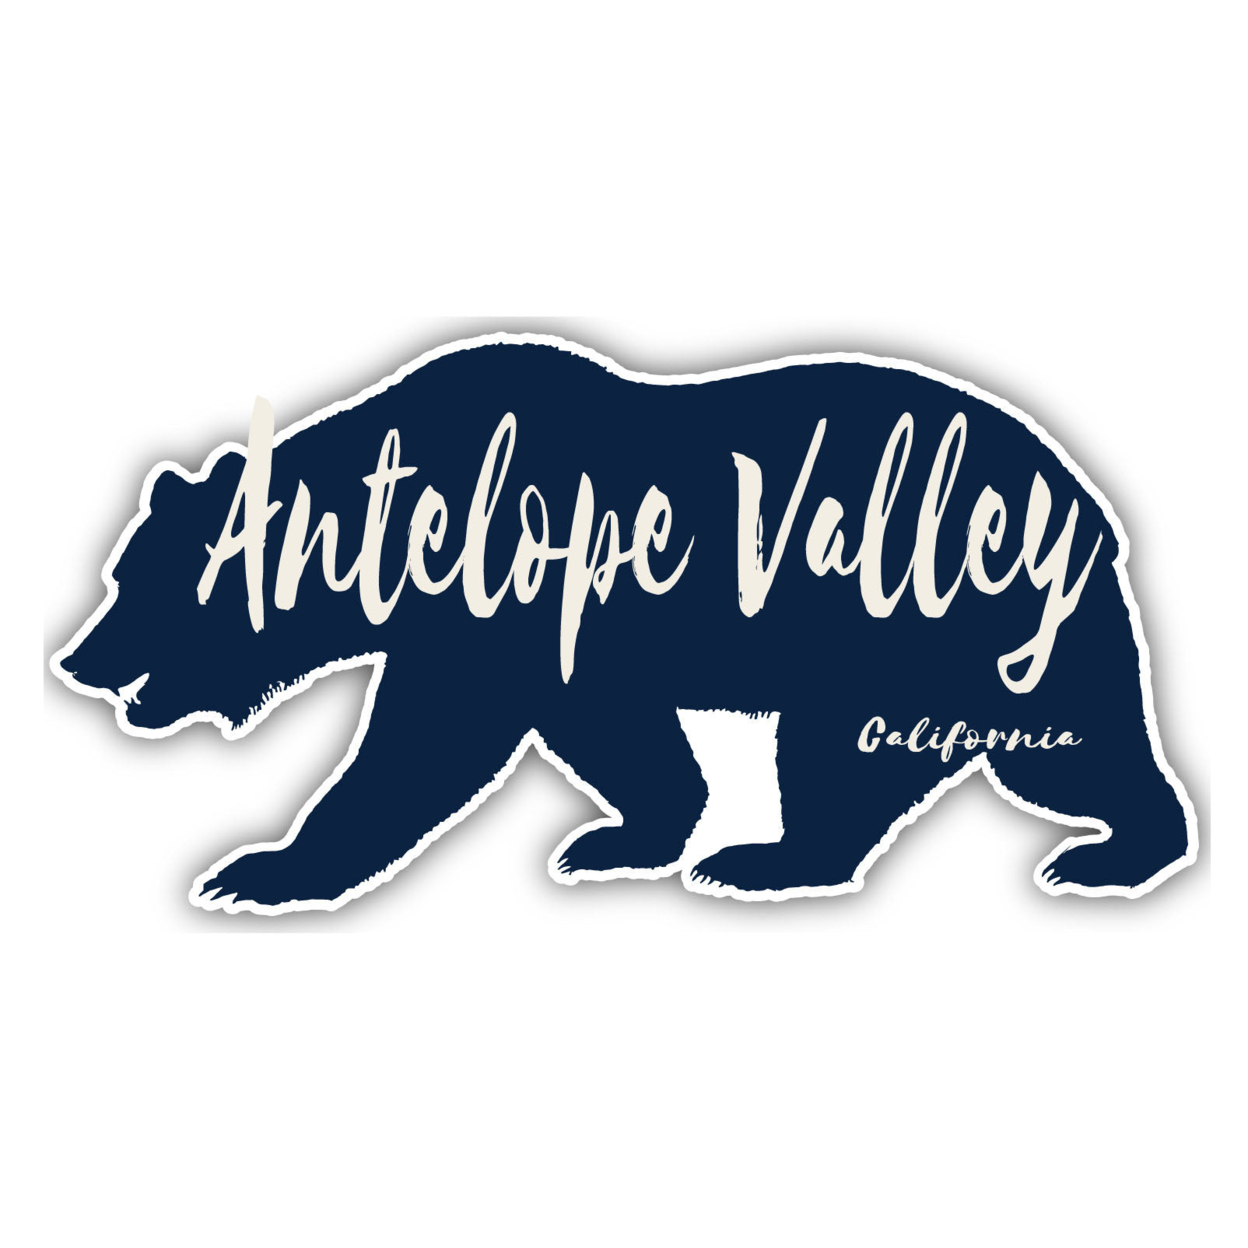 Antelope Valley California Souvenir Decorative Stickers (Choose Theme And Size) - 4-Pack, 2-Inch, Bear